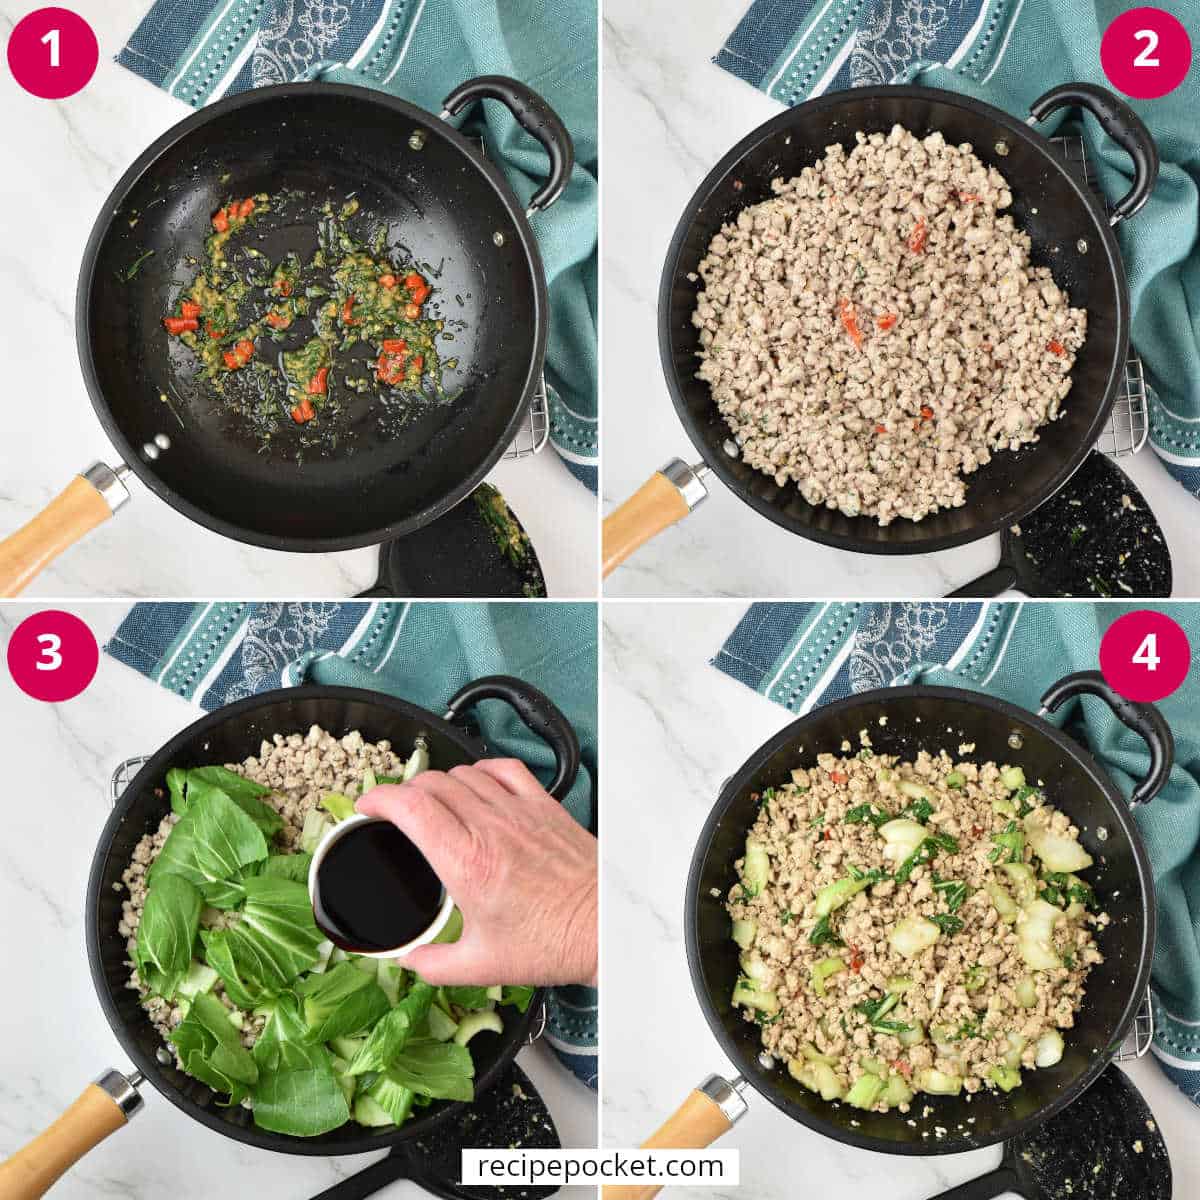 STep by step image showing how to make pork stir fry.